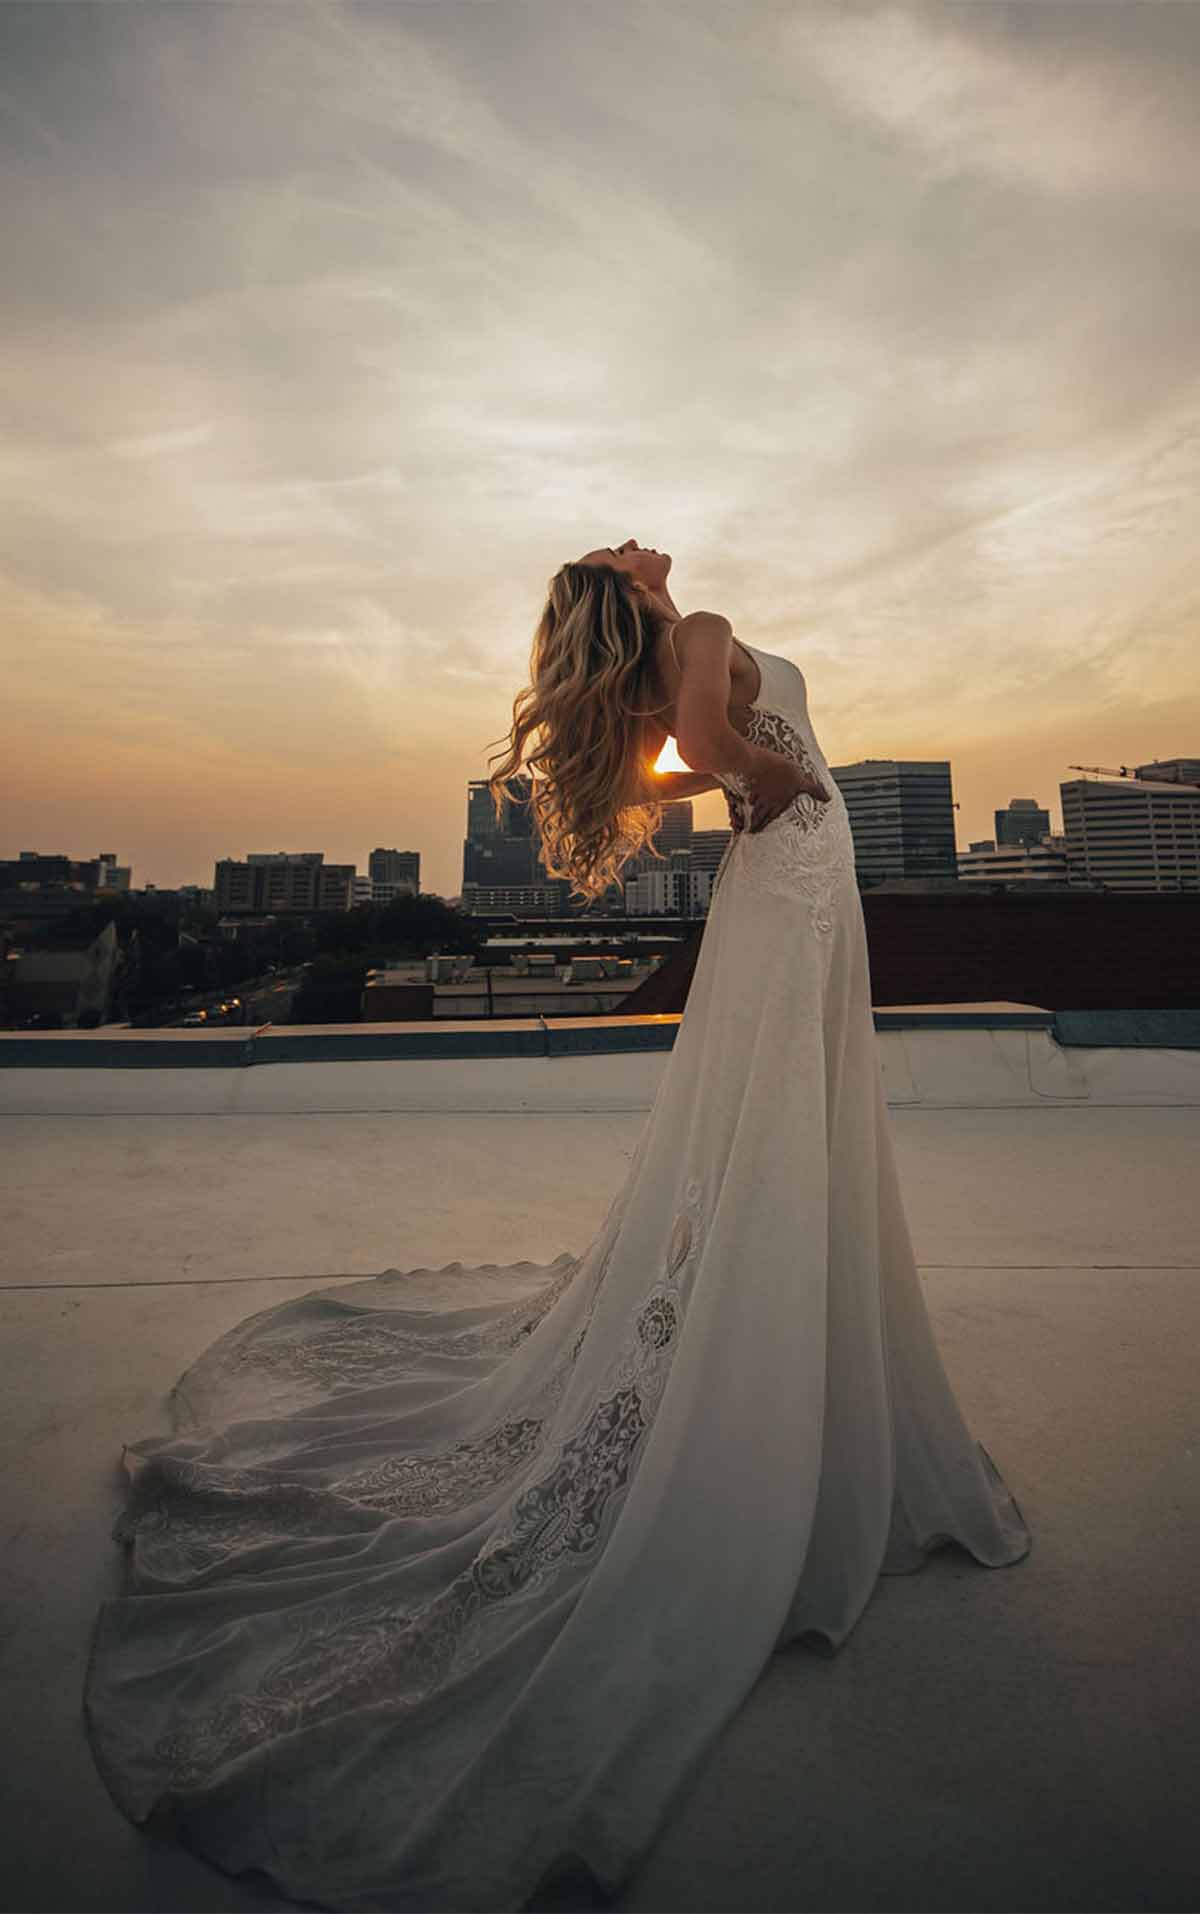 DELTA Embroidered Boho Wedding Dress with Textured Lace and Plunging Sweetheart Neckline by All Who Wander